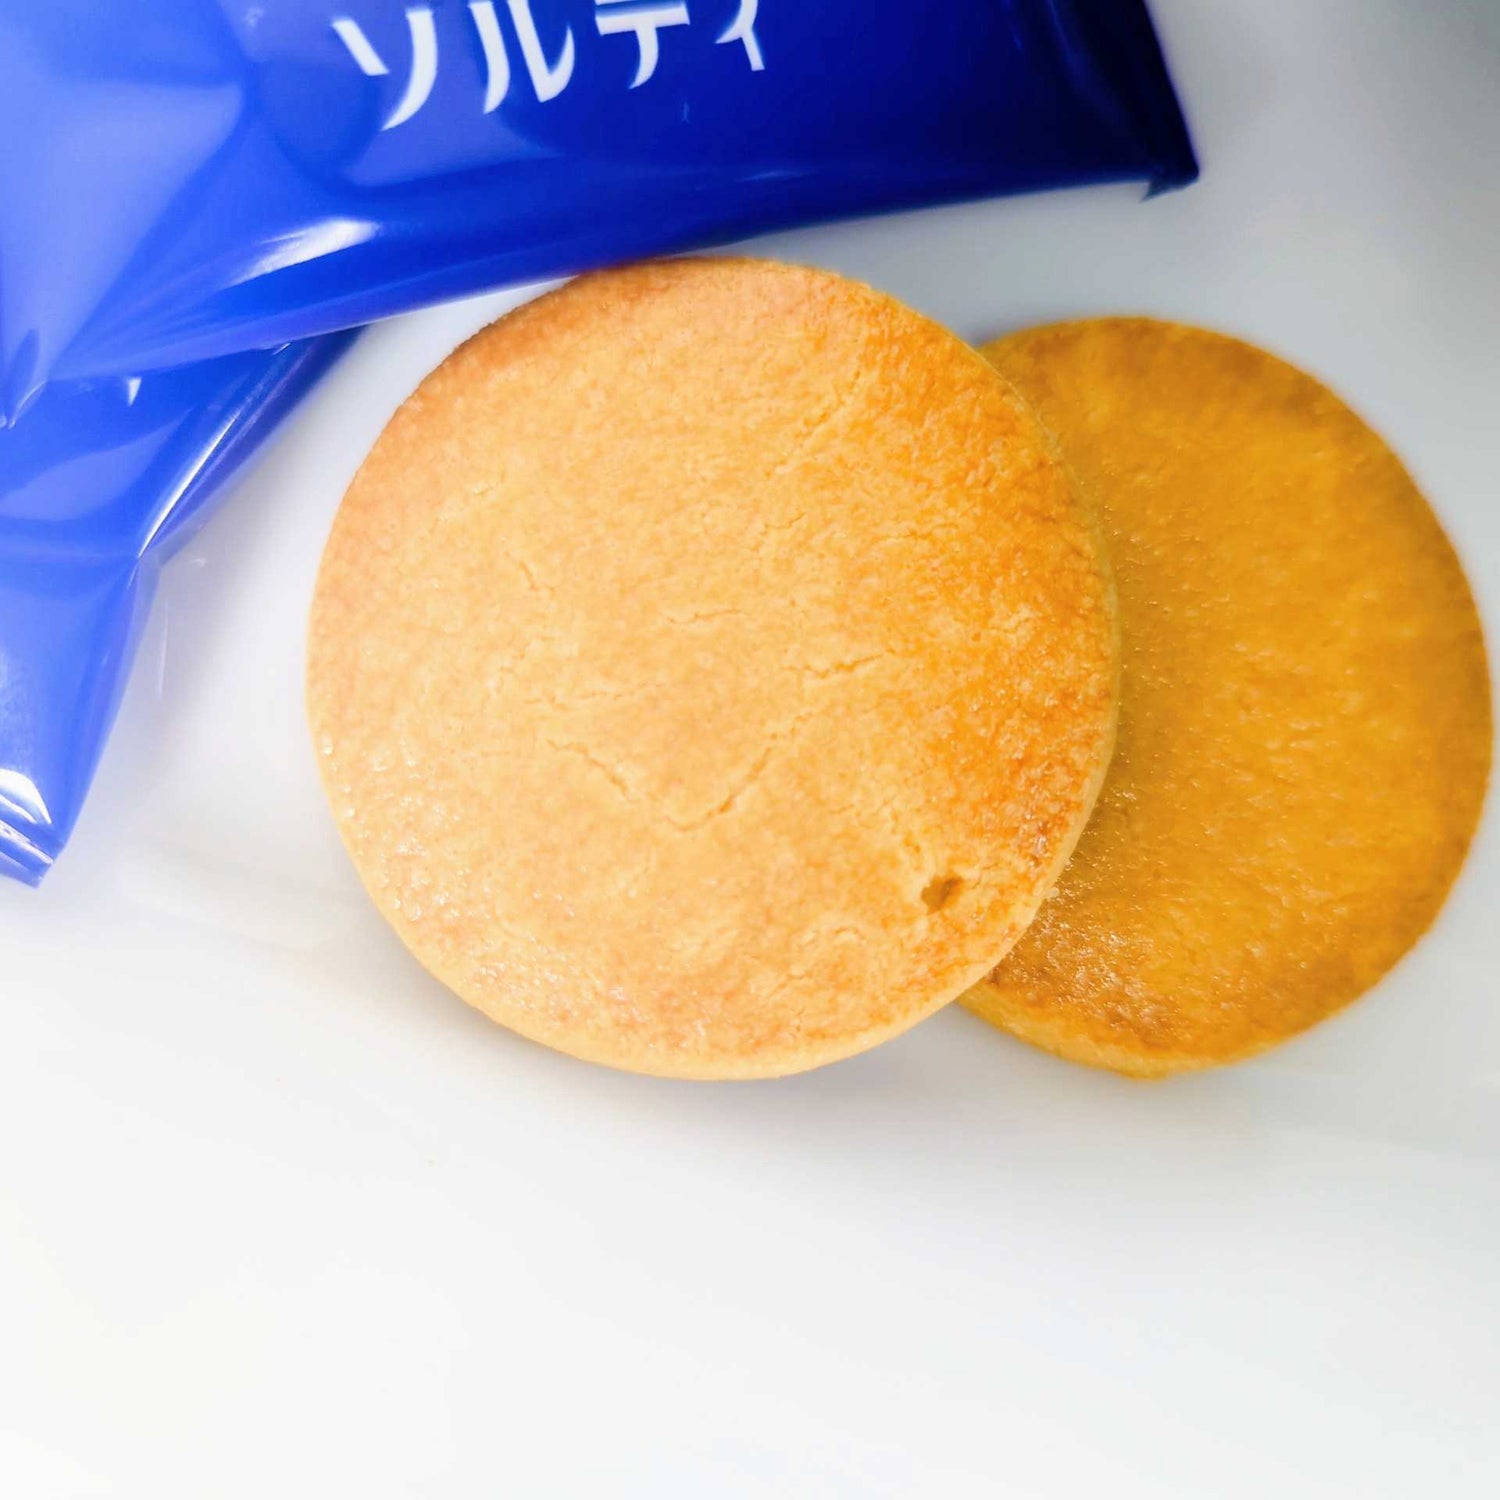 Tohato Salty Butter Cookie  8 pcs